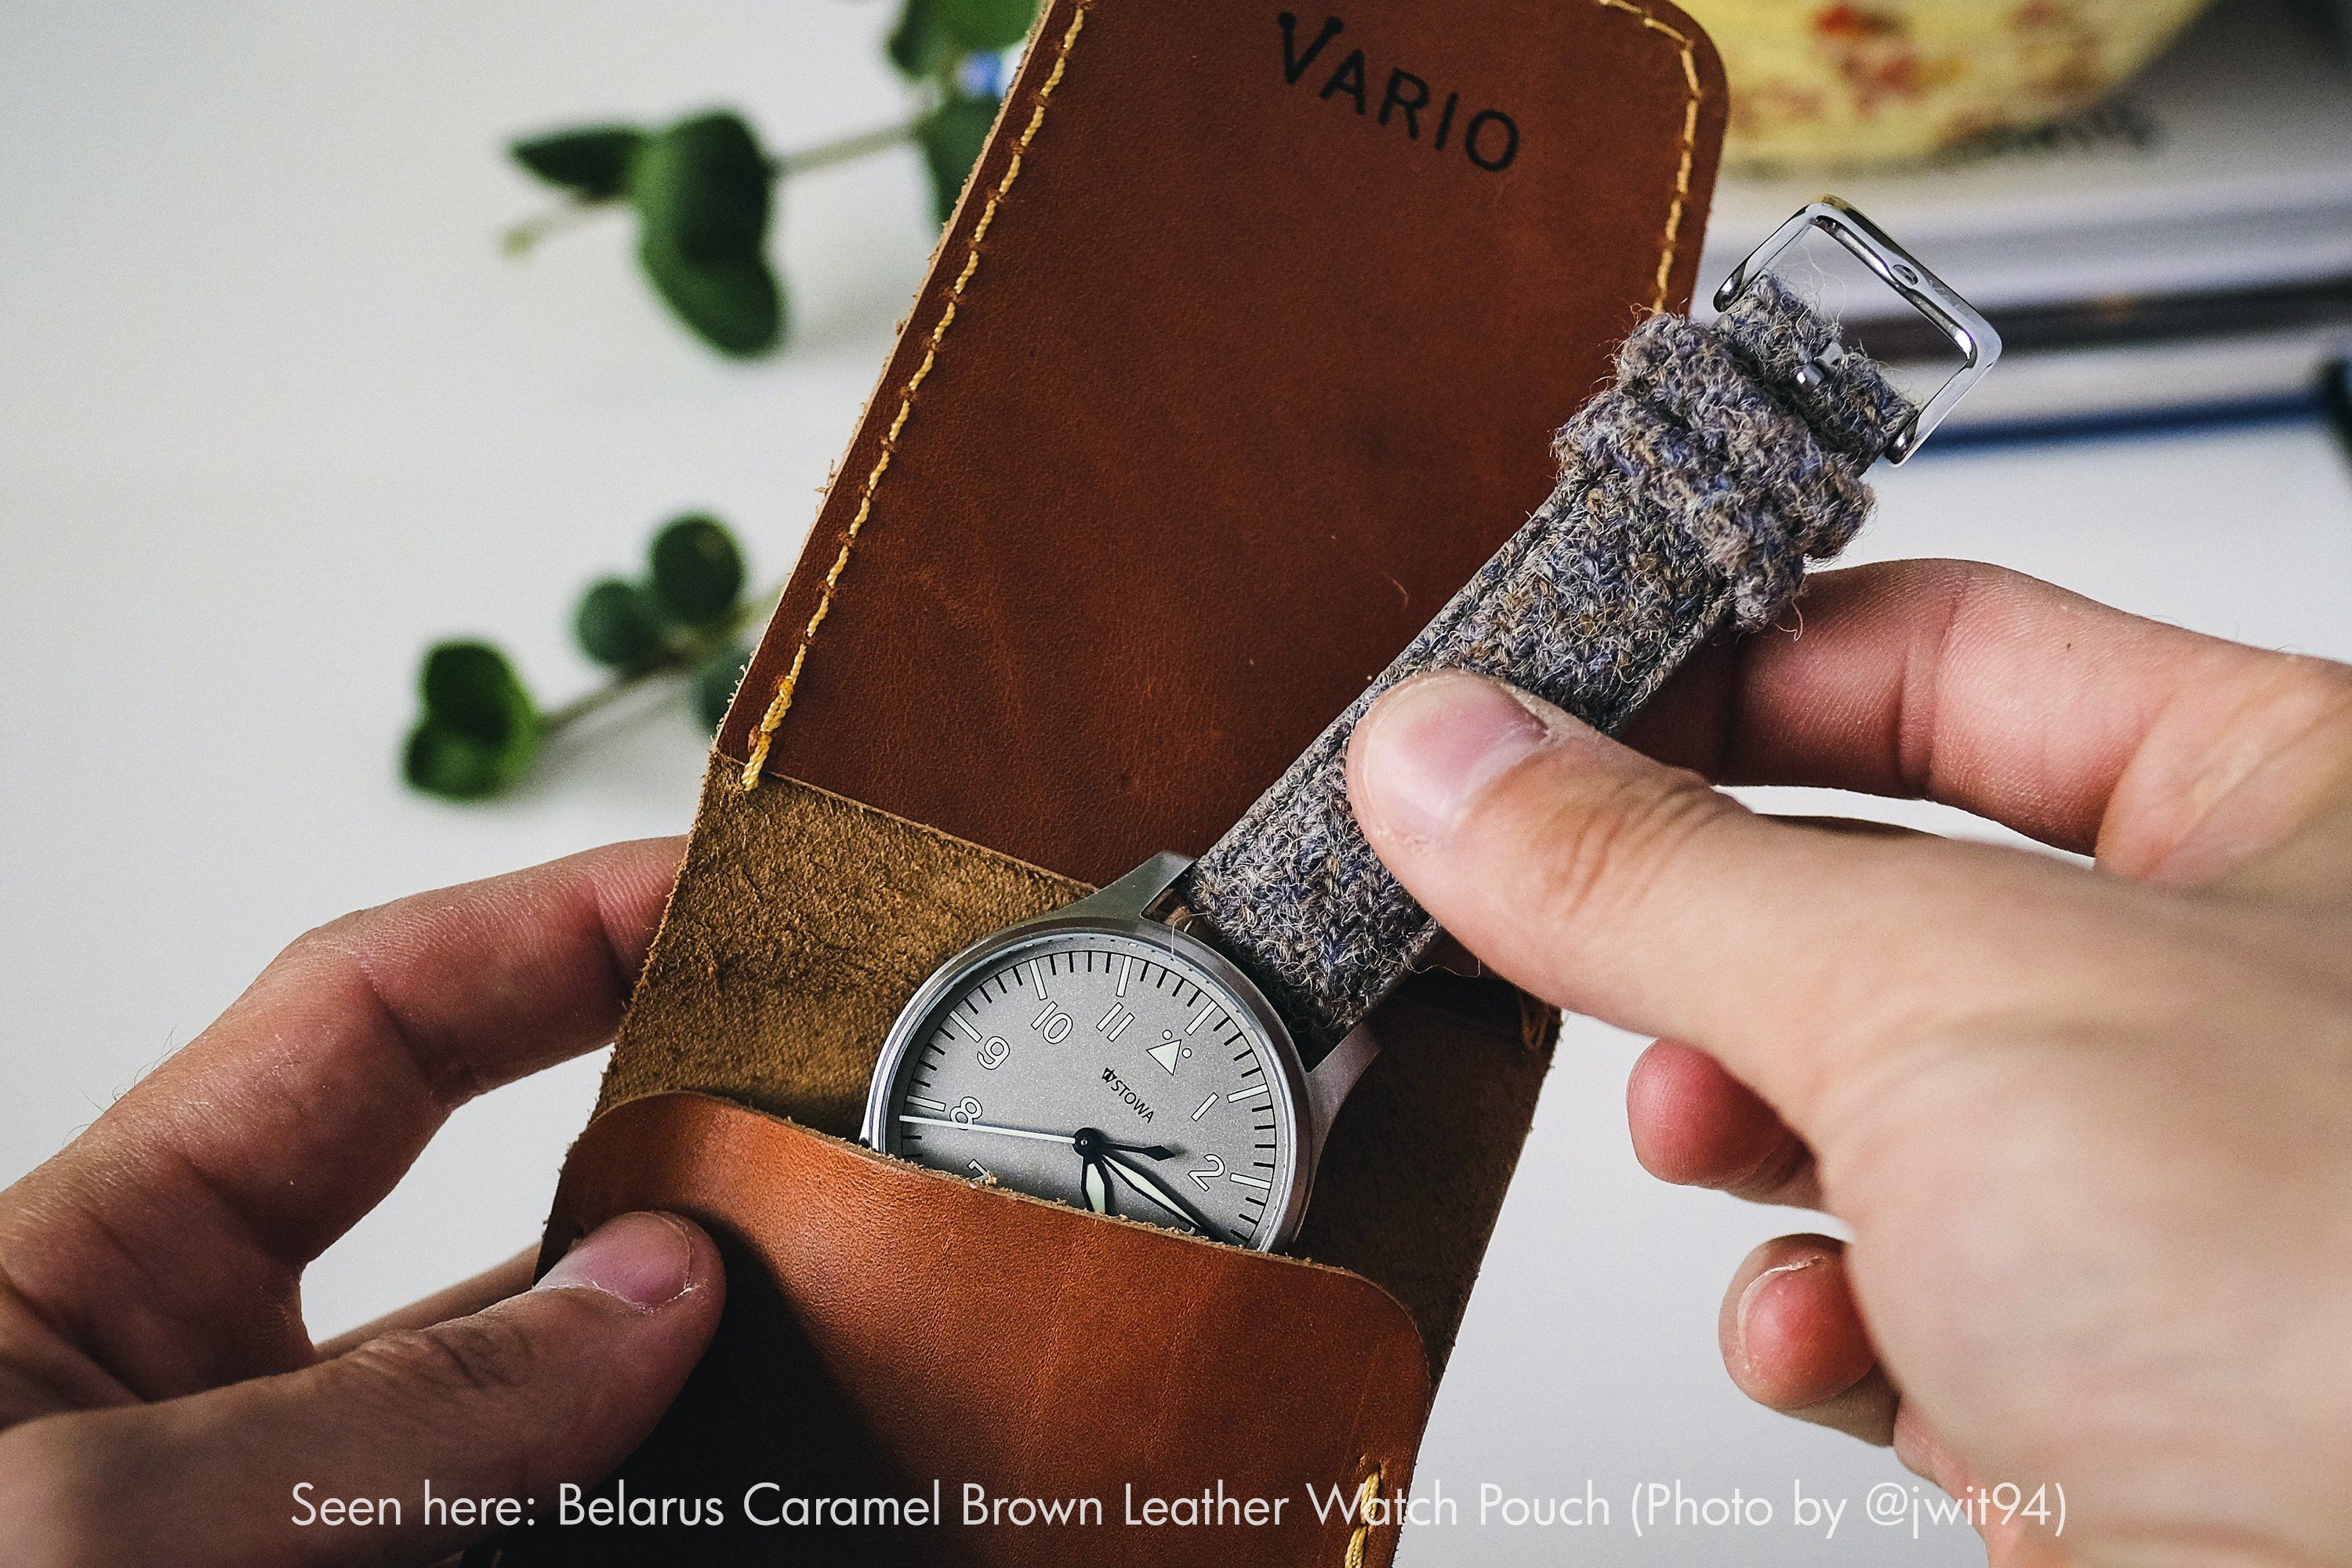 vario single watch pouch